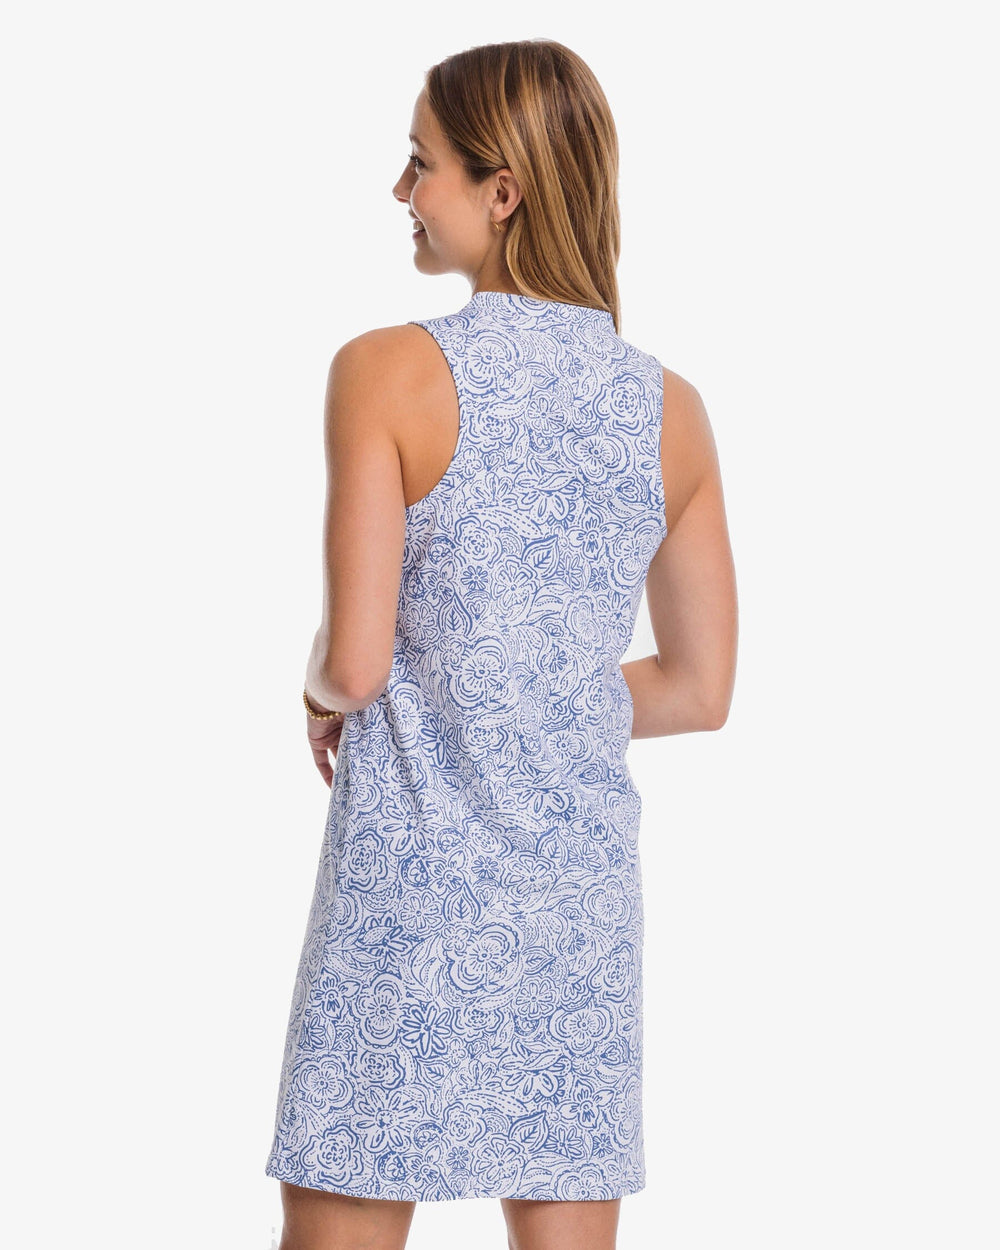 The back view of the Southern Tide Annalee Forever Floral Performance Dress by Southern Tide - Seven Seas Blue